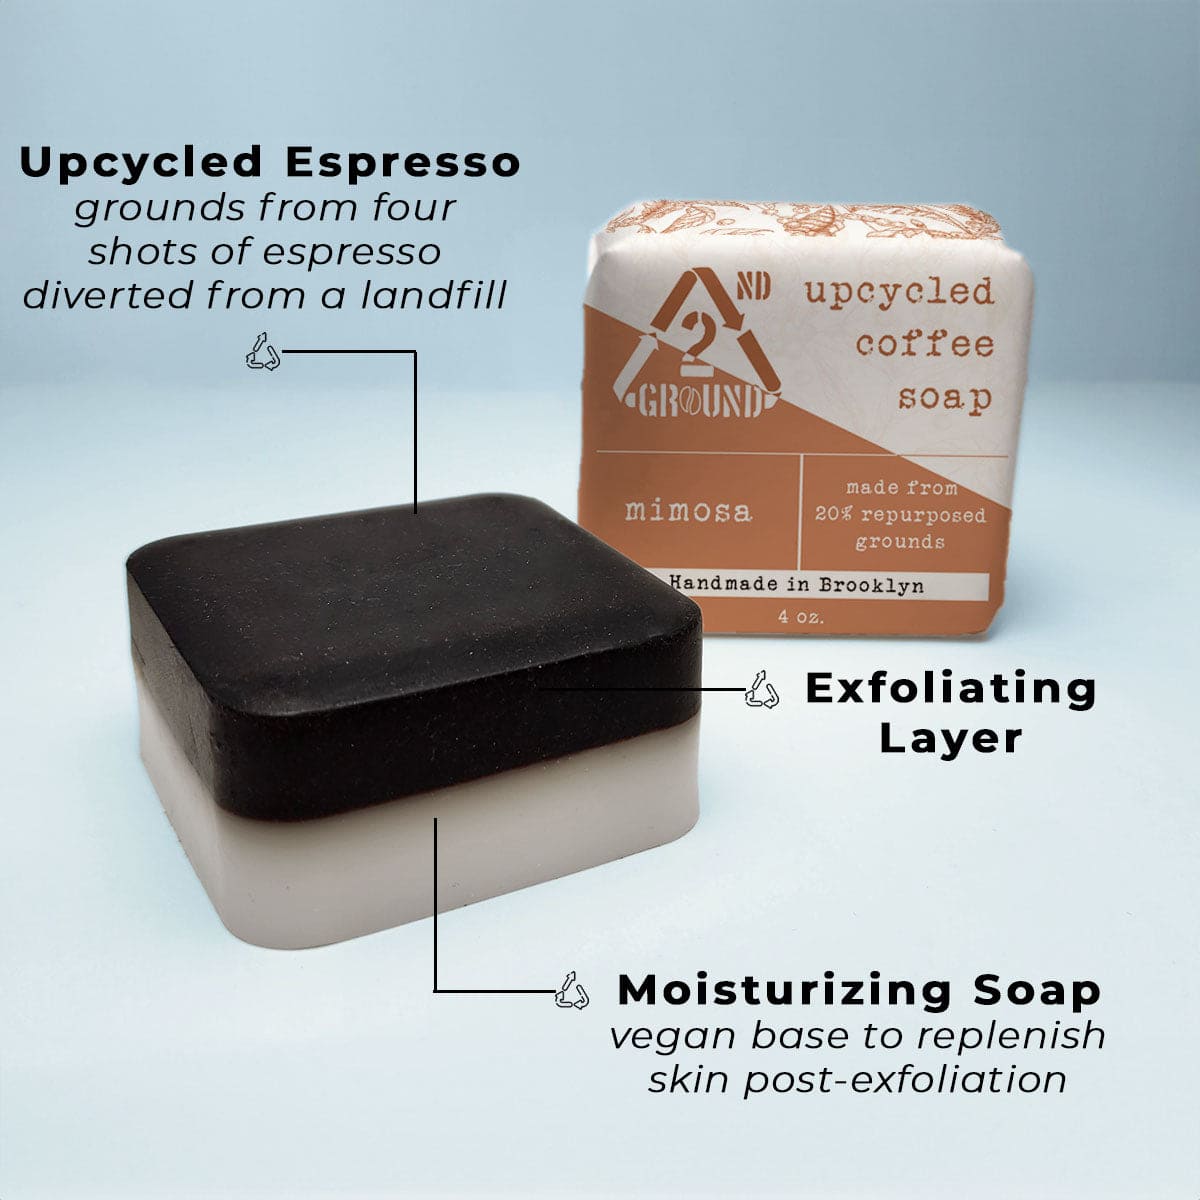 Benefits of mimosa upcycled coffee soap